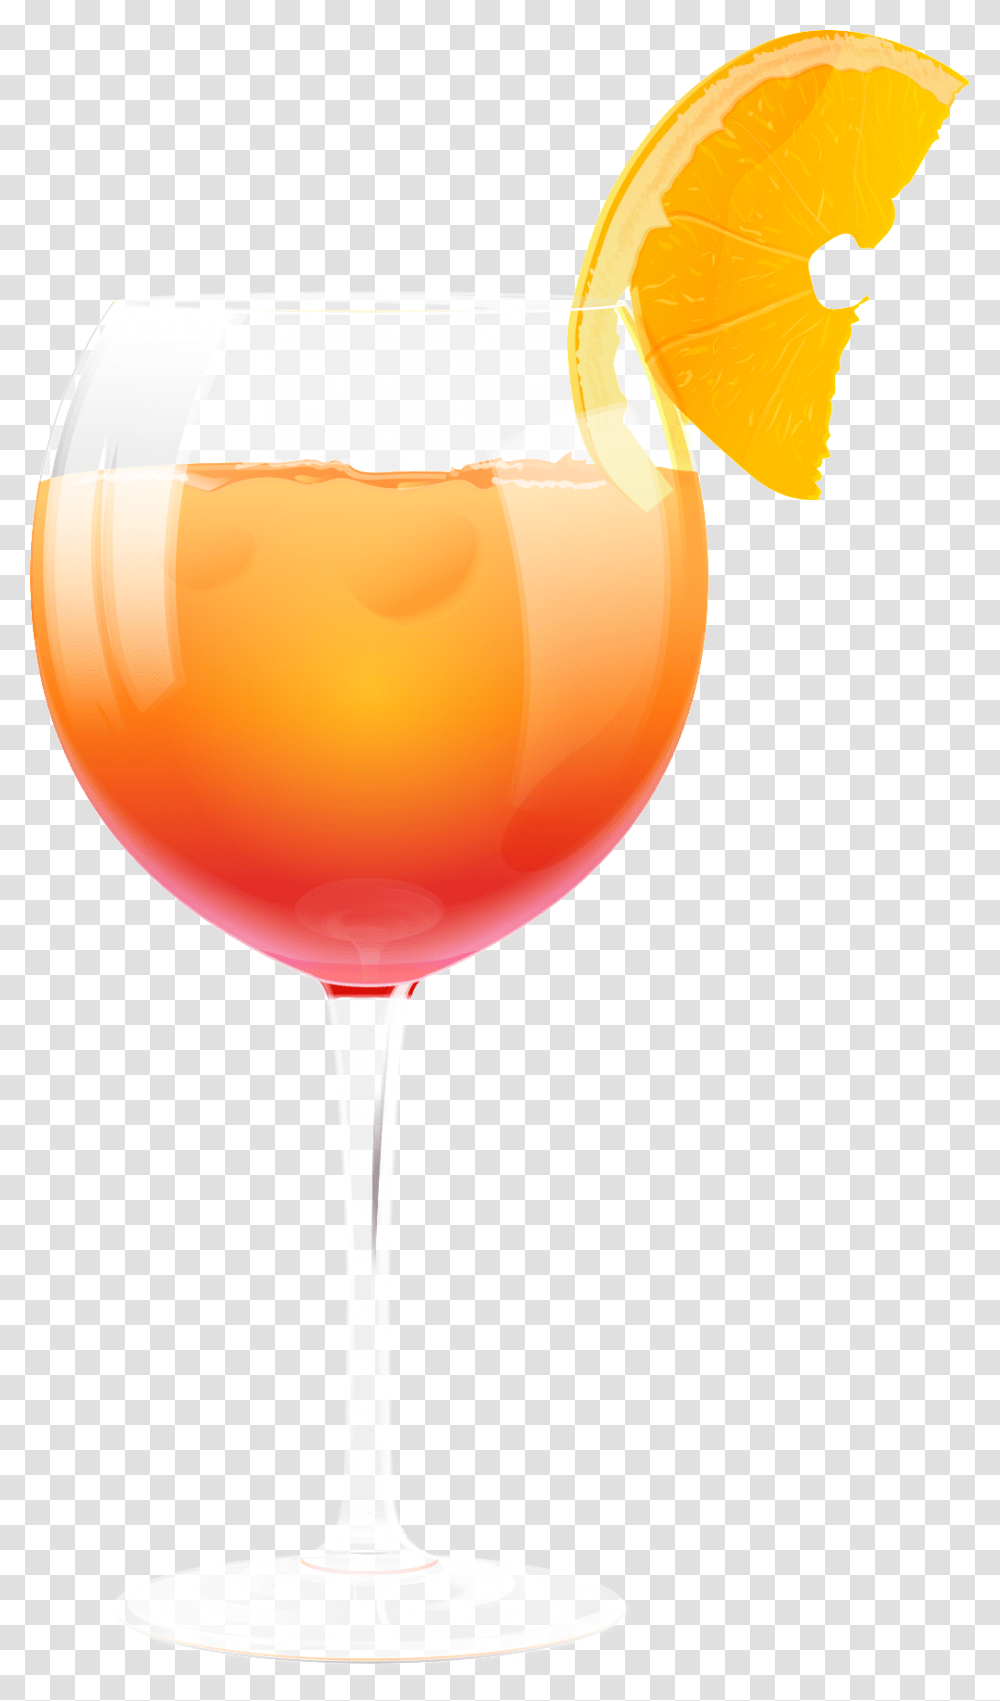 A Cup Of Summer Fresh Orange Juice Drink Free, Beverage, Glass, Balloon, Alcohol Transparent Png